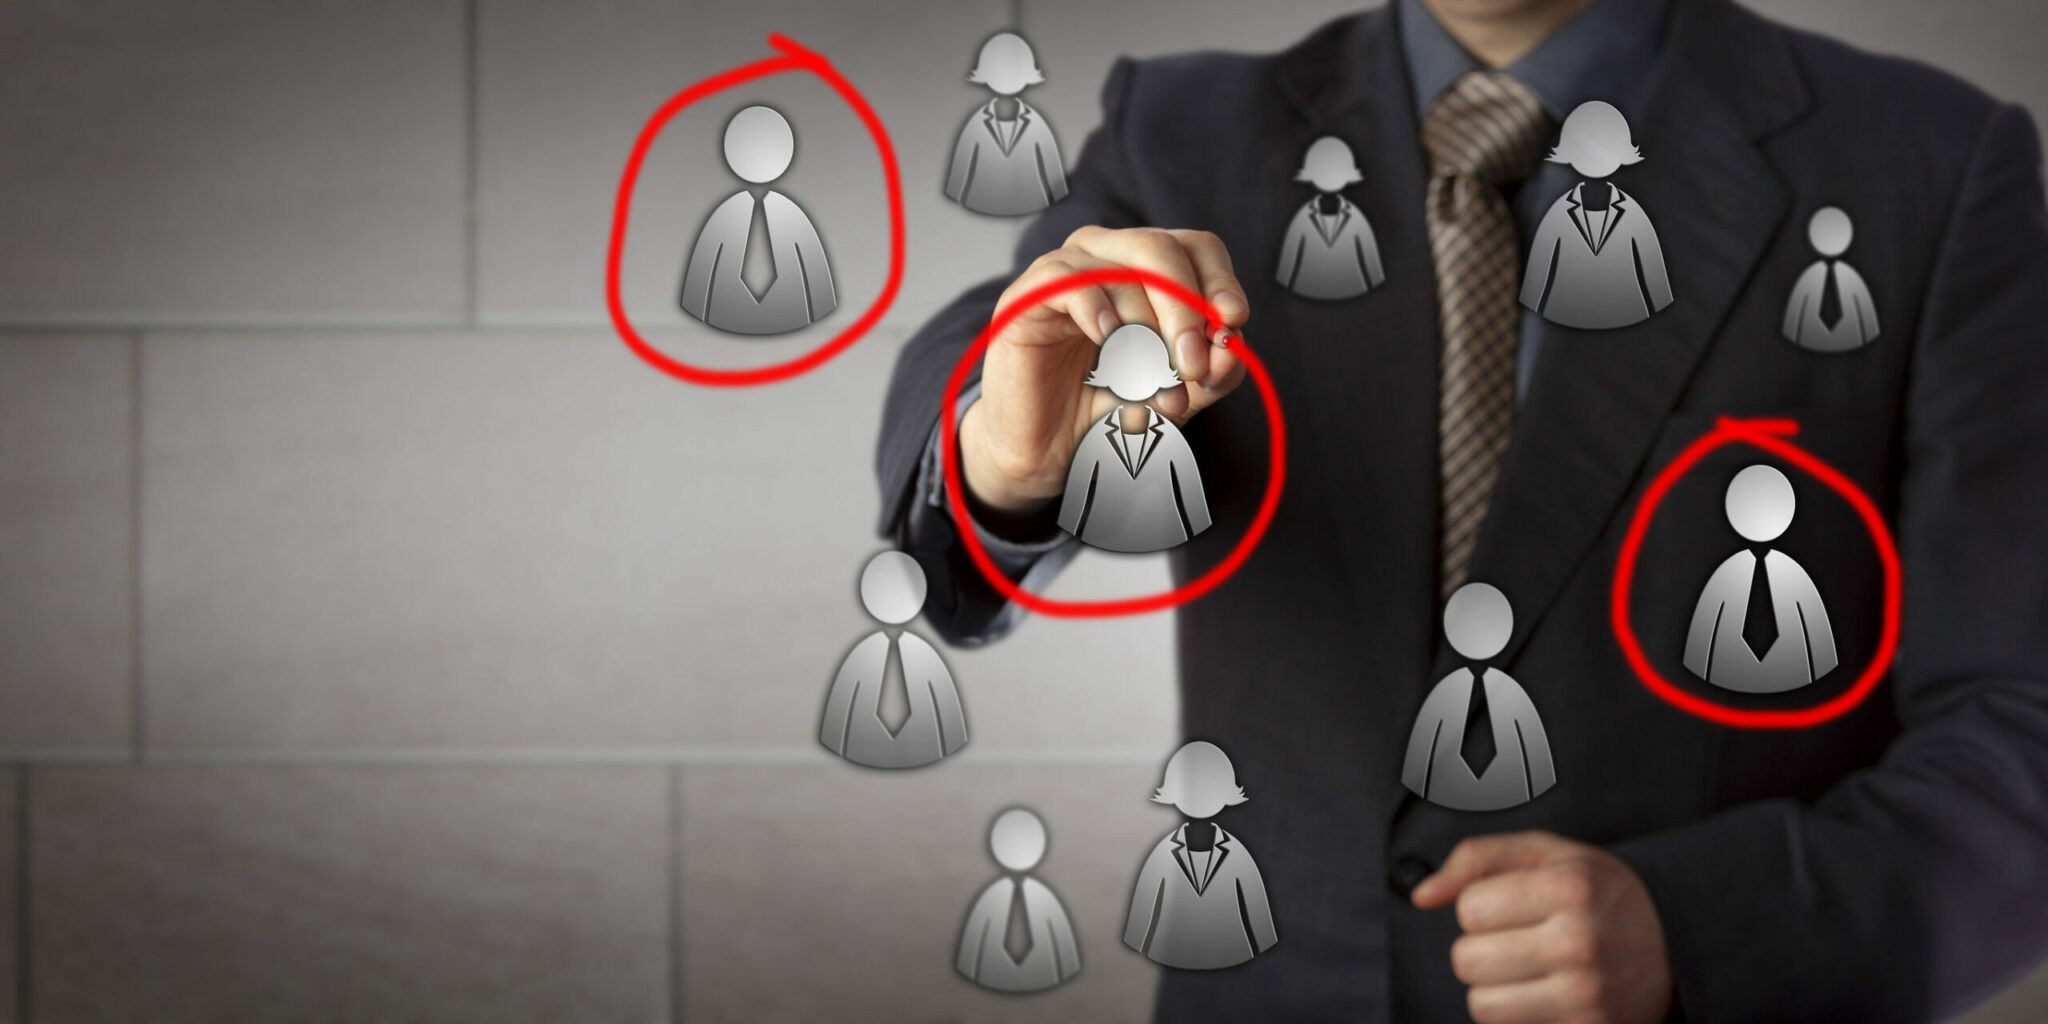 Blue chip marketing manager is circling three candidates in a group of male and female white collar icons. Business concept for target audience market segmentation sales prospecting and recruiting.